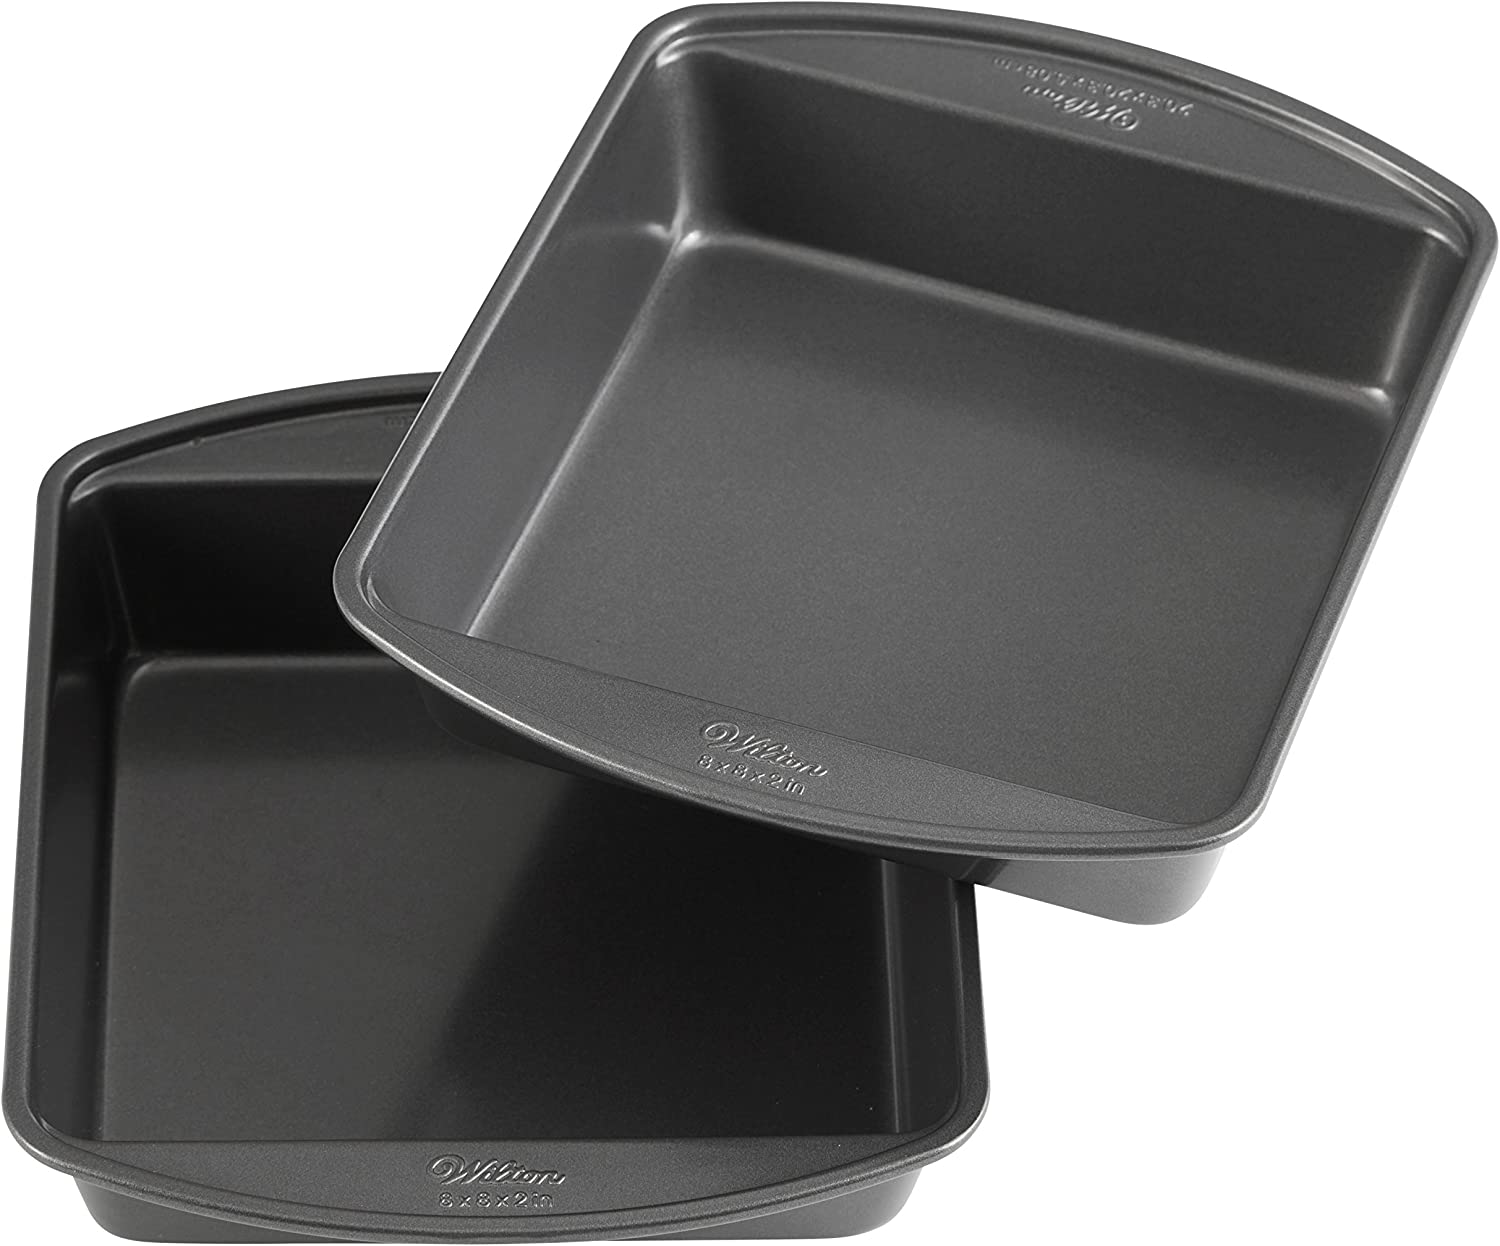 8-Inch Square Cake Pans